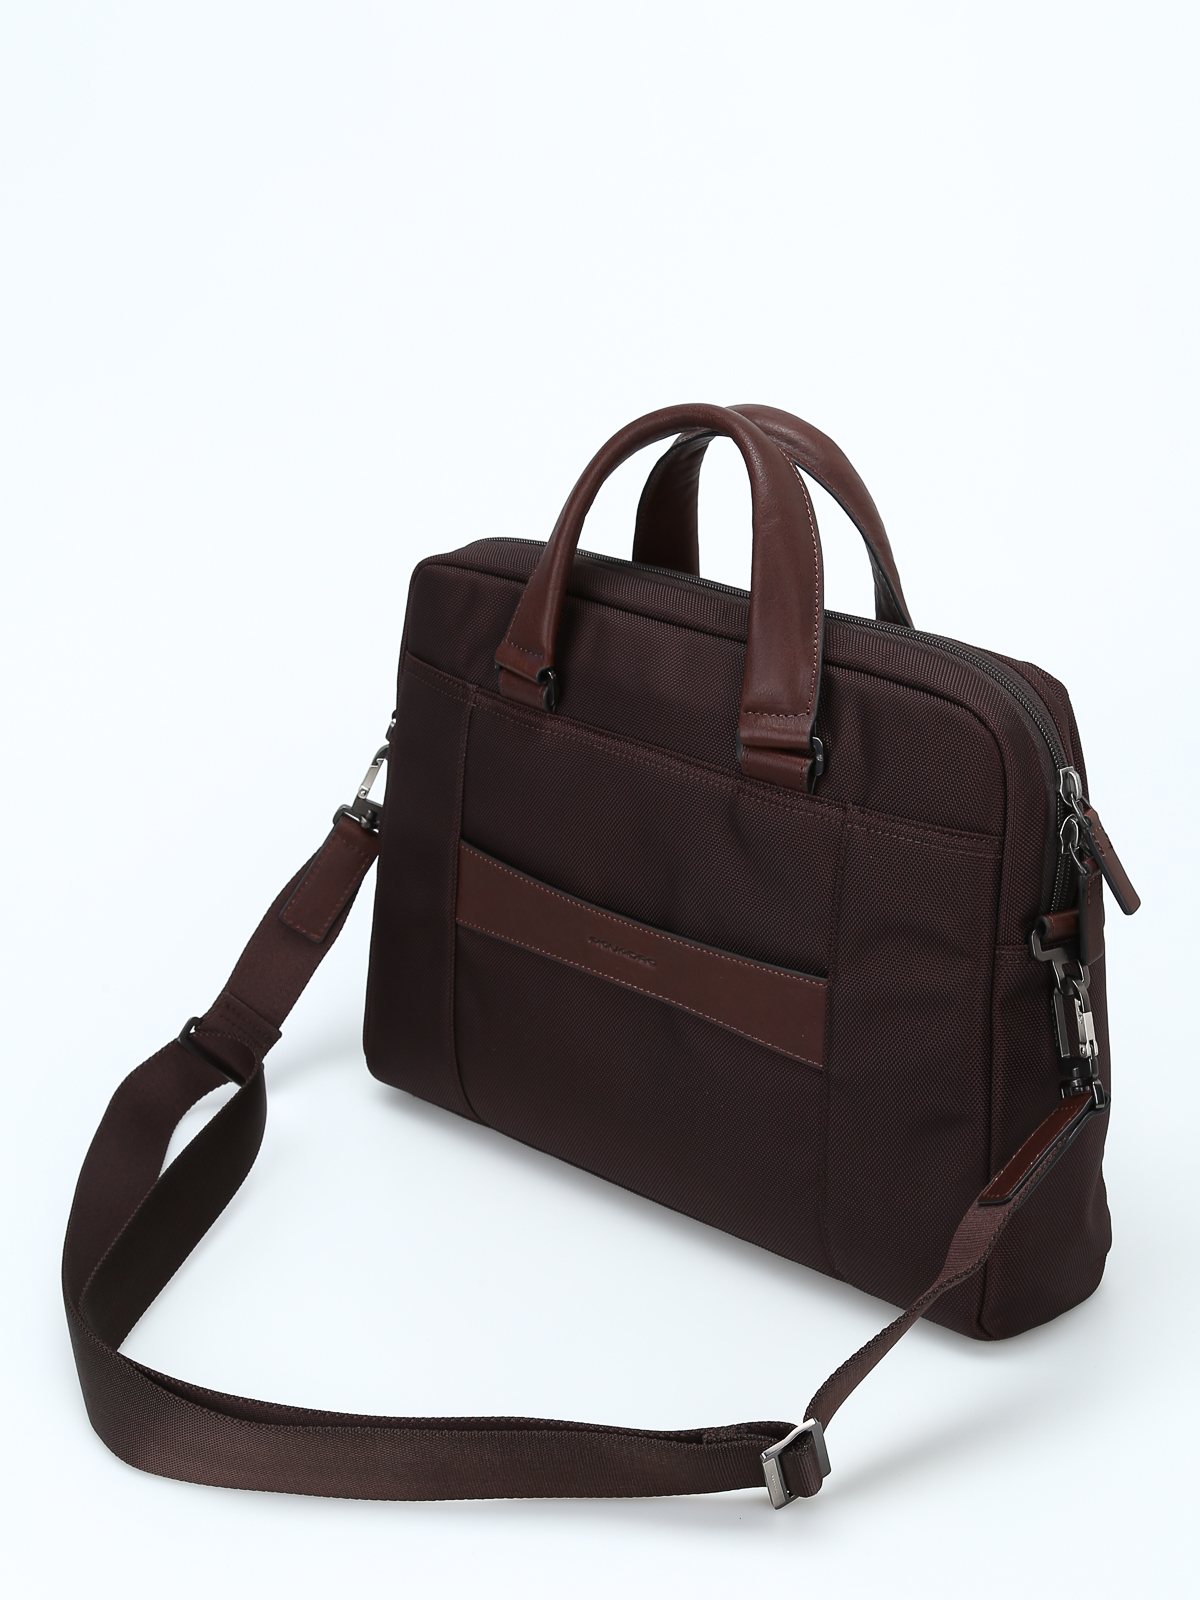 Laptop bags & briefcases Piquadro - Water resistant fabric brown